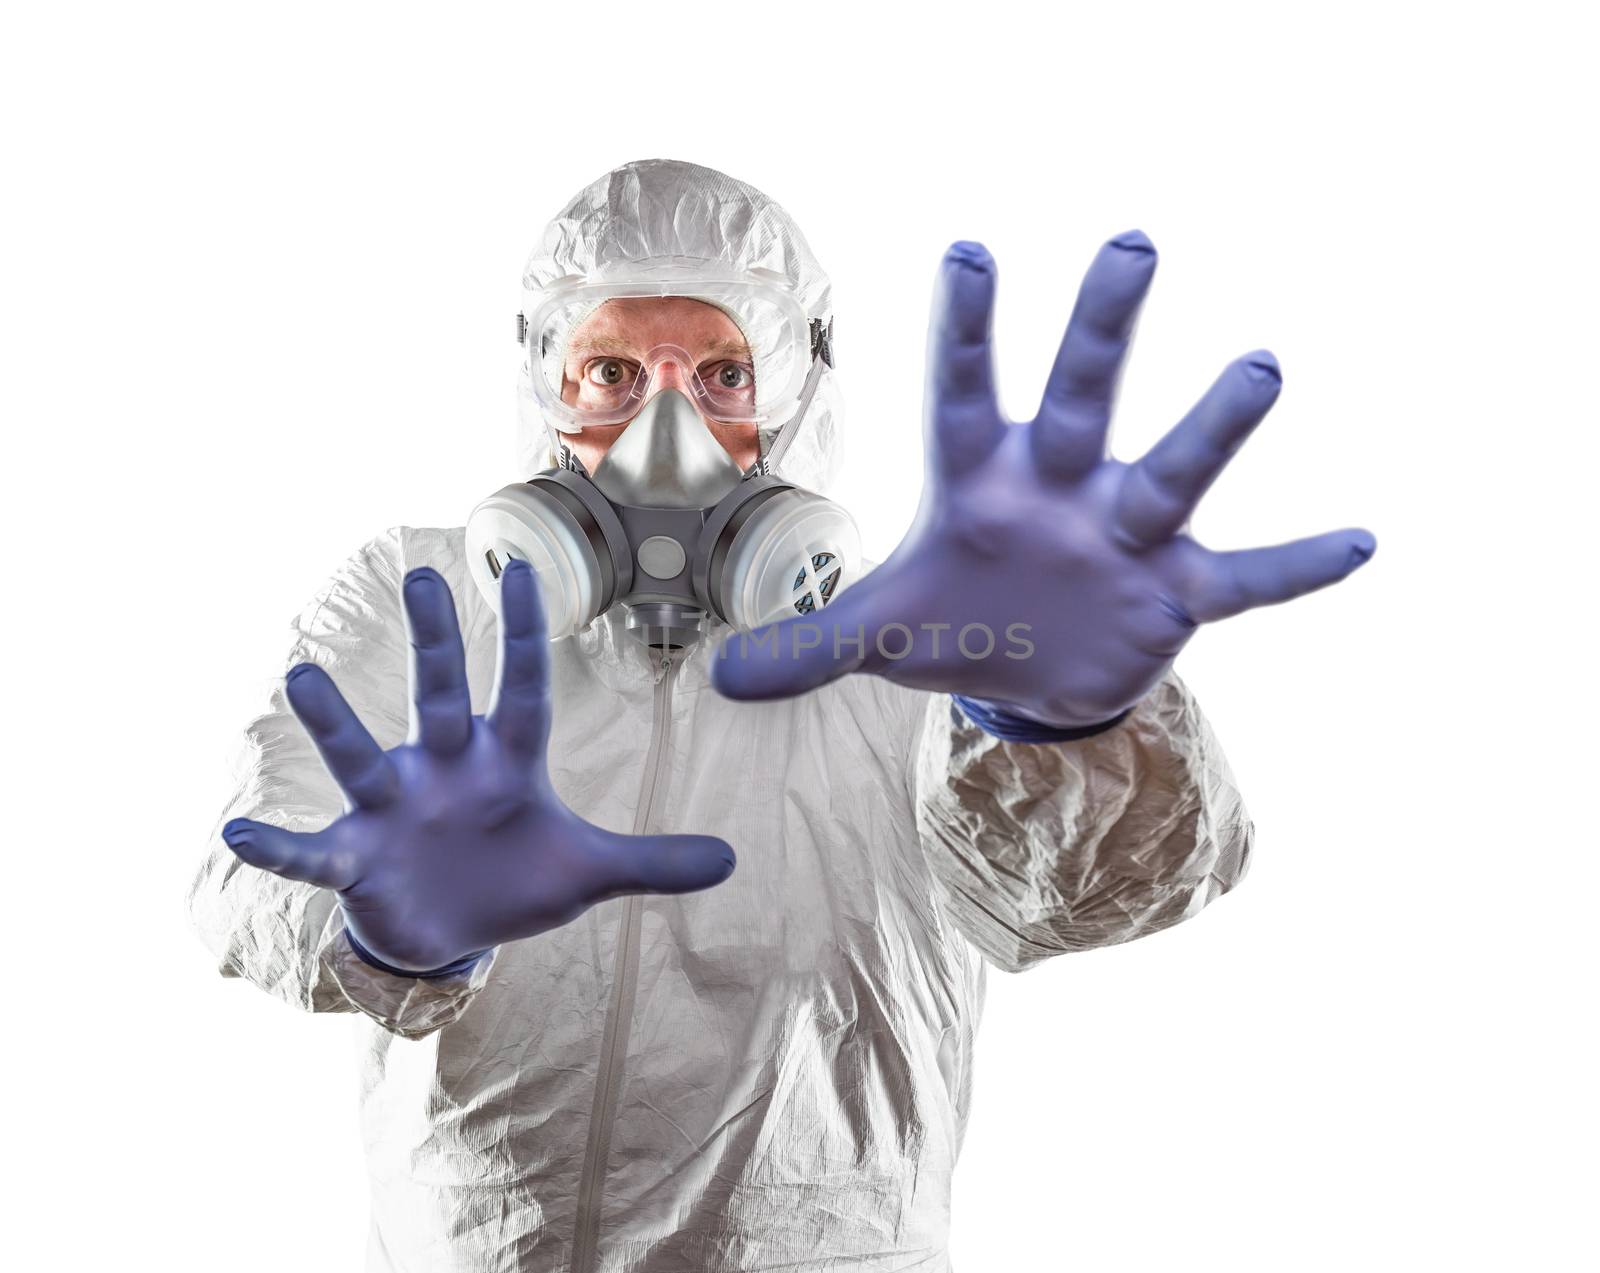 Man Wearing Hazmat Suit, Protective Gas Mask and Goggles Reaching Out With Hands Isolated On White.